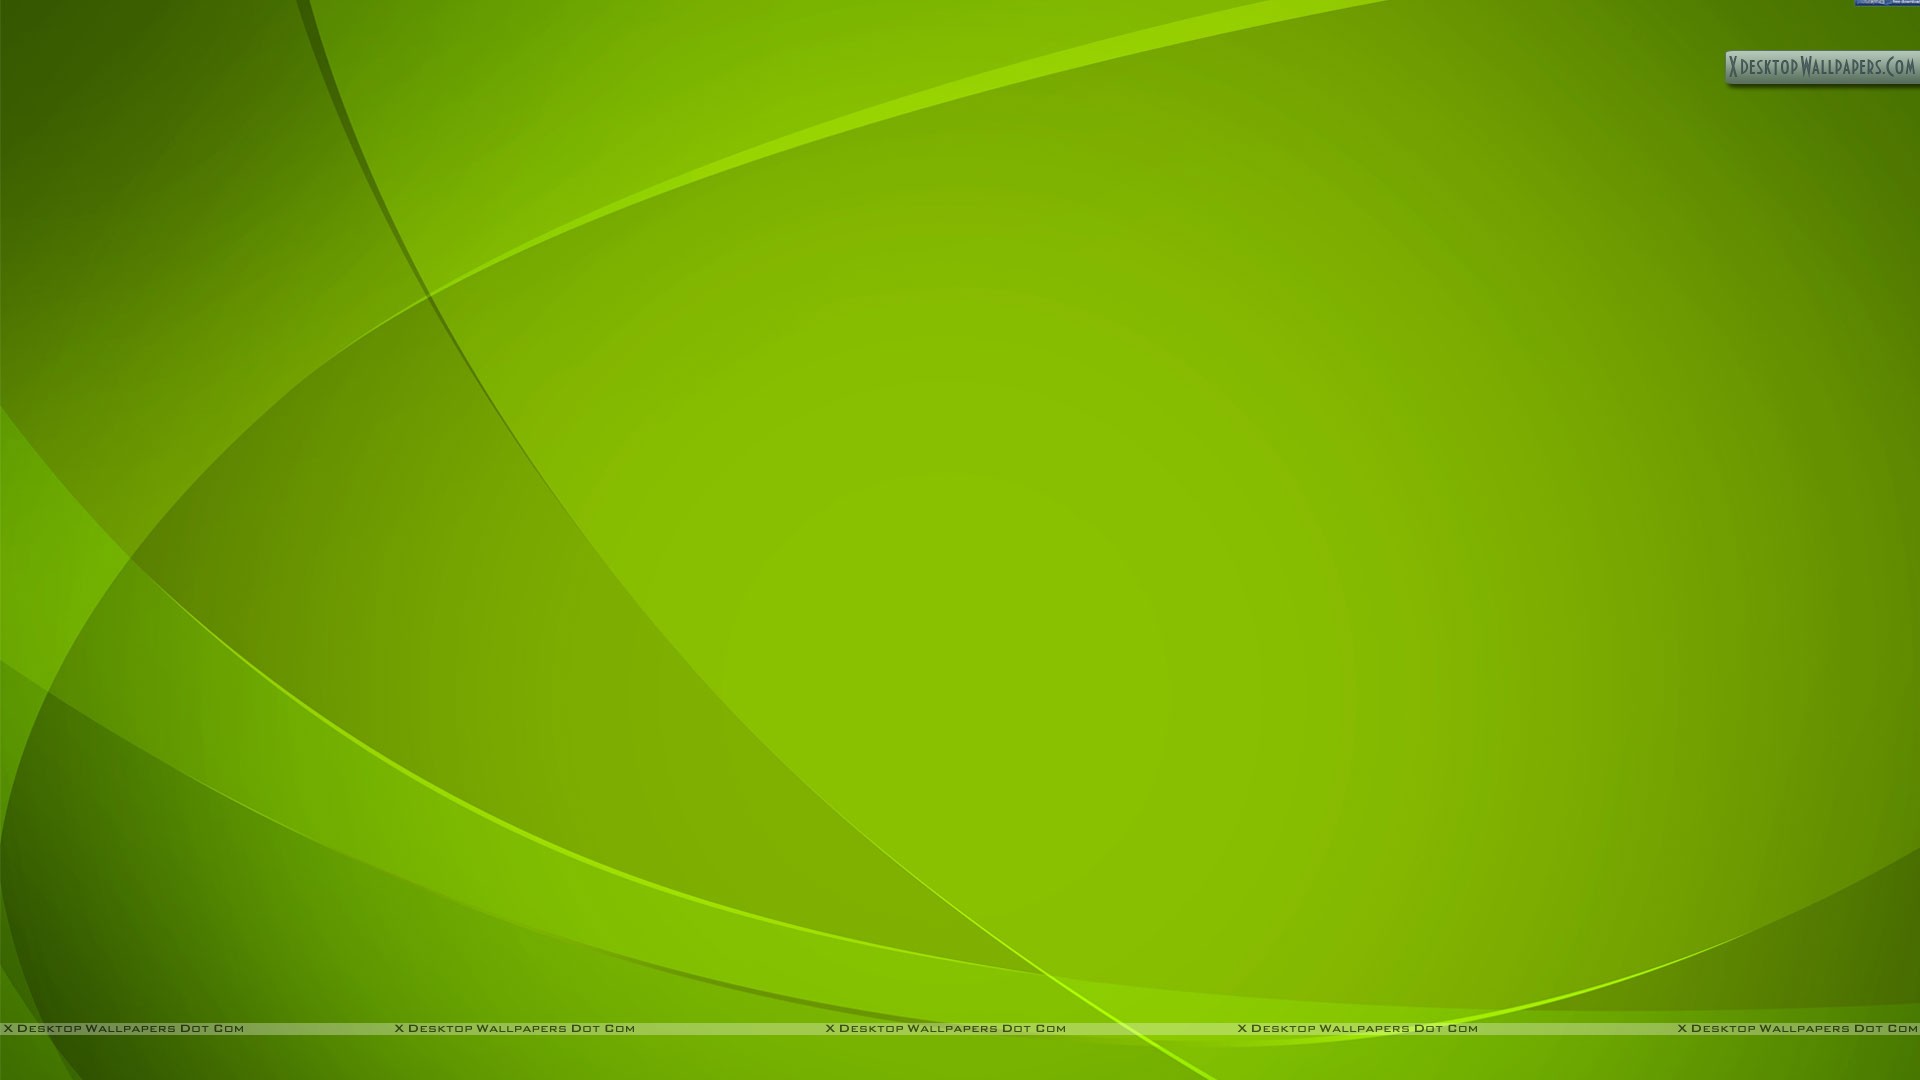 You are viewing wallpaper titled Green Cool Abstract Background